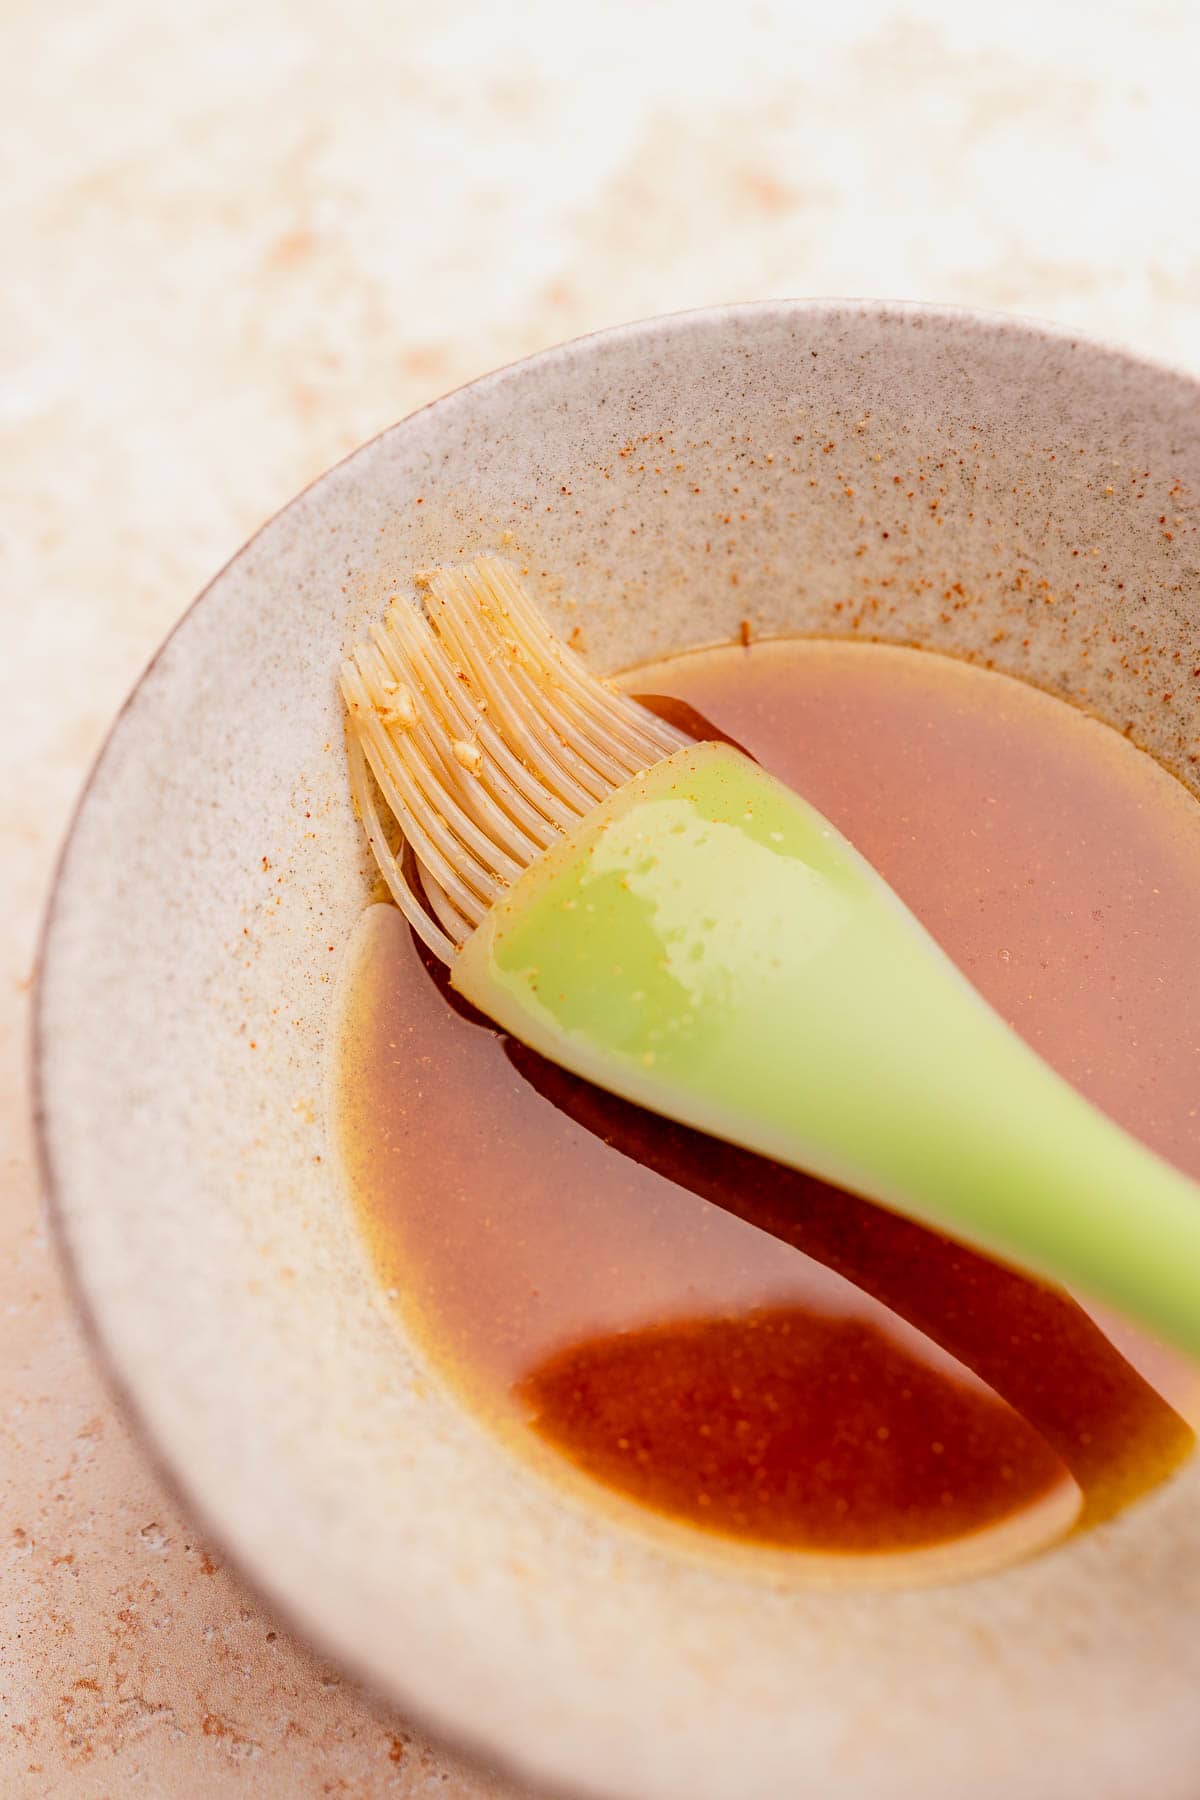 A ceramic bowl with soy sauce and a green brush lying across it on a textured surface with cabbage steaks.